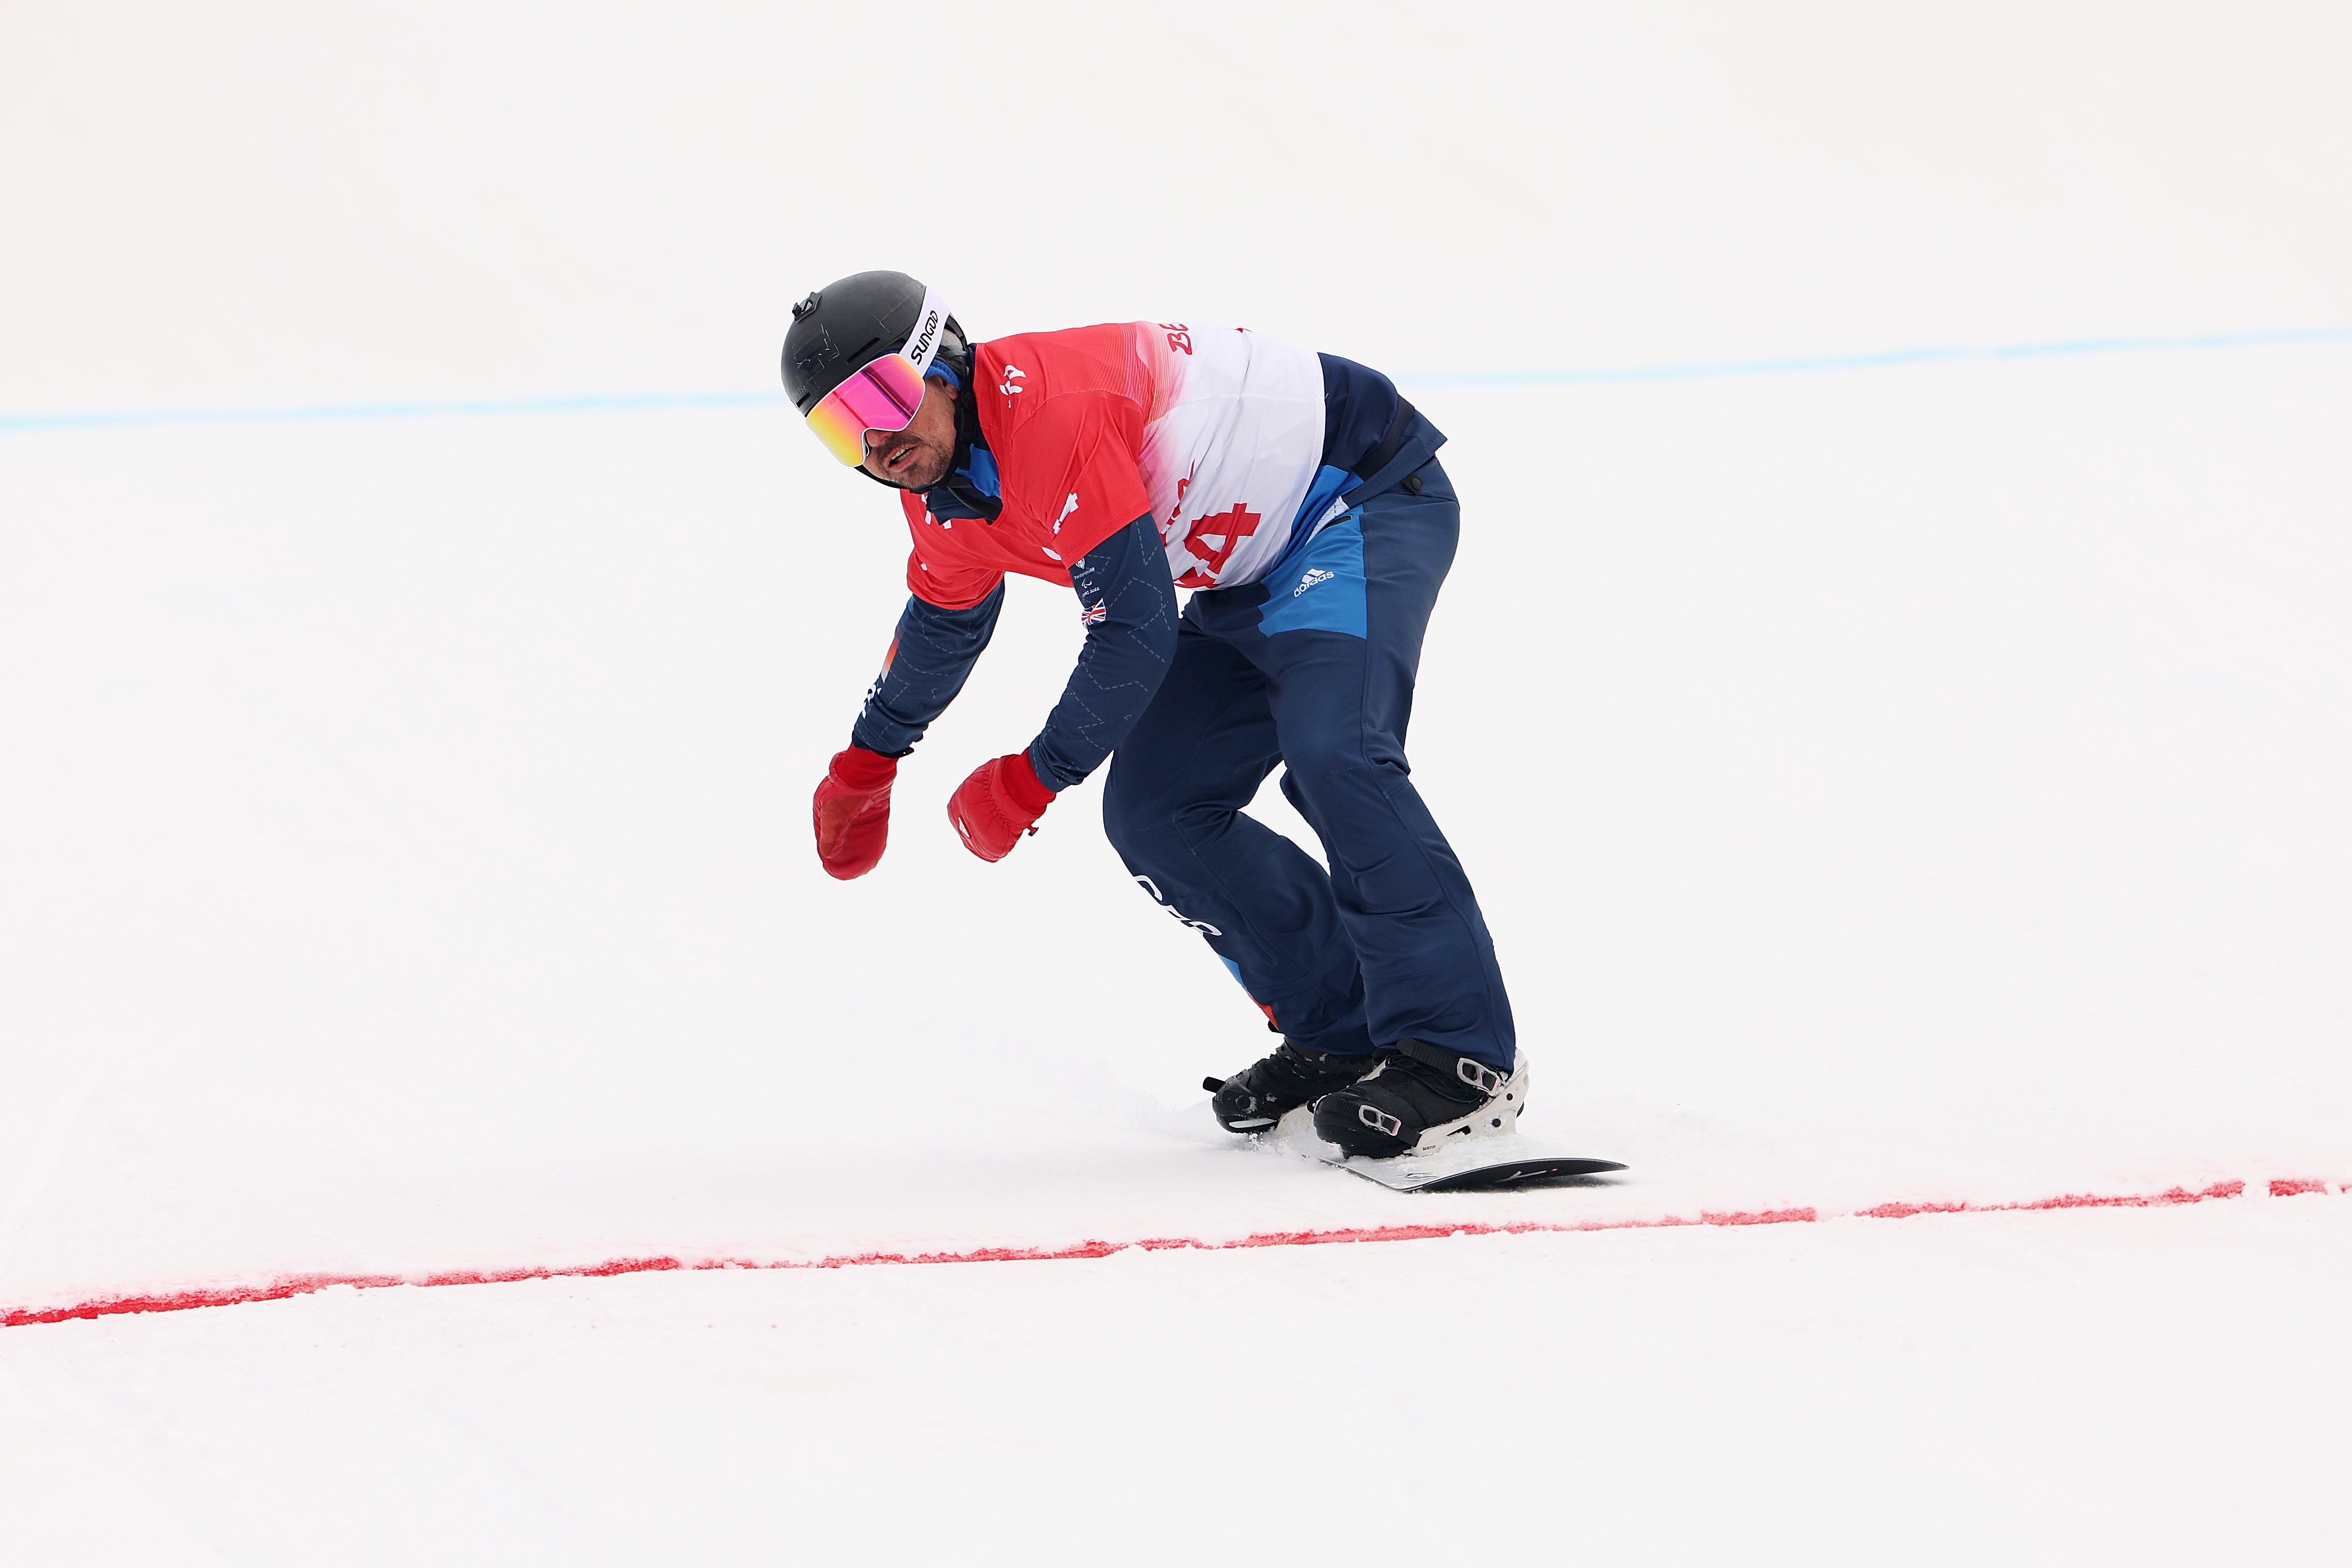 Ollie Hill says coming off social media helped him make history by winning Great Britain’s first Paralympic snowboarding medal